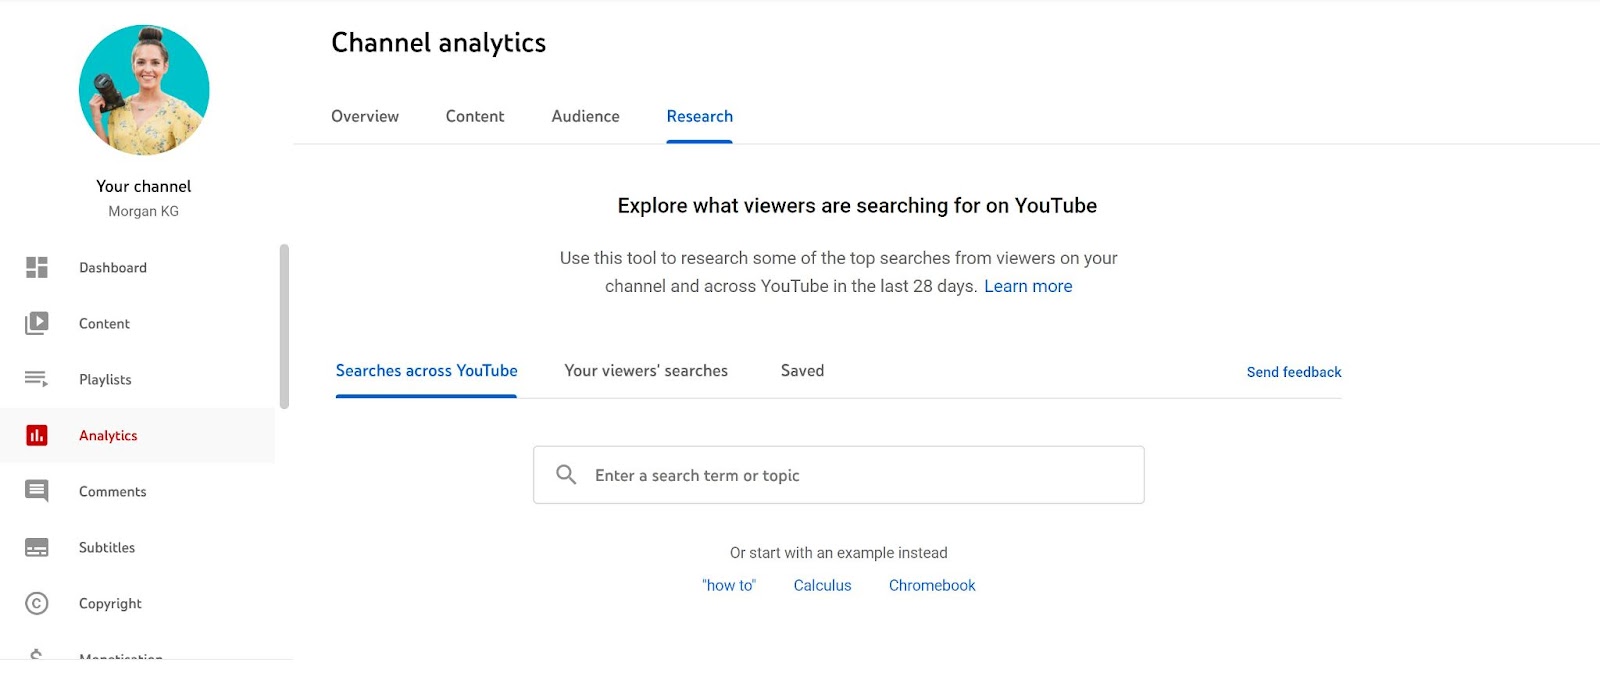 The research section of analytics